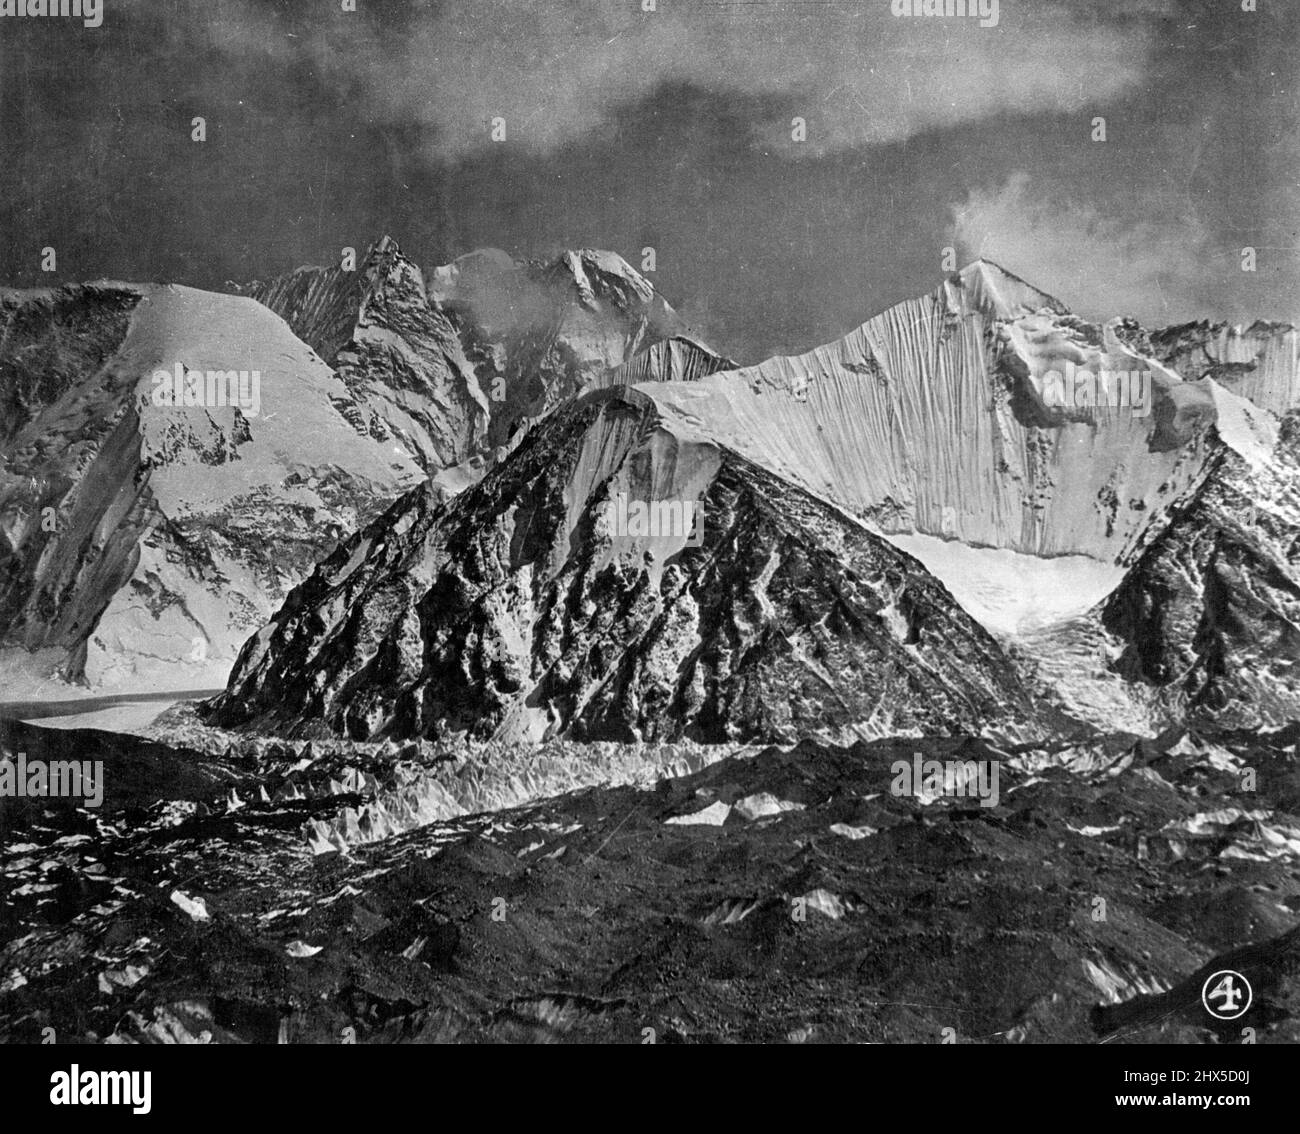 The Mount Everest Expedition: 'The Times' Service -- Scenery of the great Rongbuk Glacier of Mount Everest. Surrounding Everest is one of the finest mountain massifs of the world with huge unnamed peaks and vast winding glaciers. The great sugar loaf of Pumori with hanging glaciers on its almost precipitous slopes has been named by the expedition's surveyors. A fine mountain, but not so high, is the Island peak standing in the centre of the main Roncituk glacier. The peak is beautifully fluted and often avalanches of snow and ice sweep down to the glacier basin below. The glacier in the main v Stock Photo